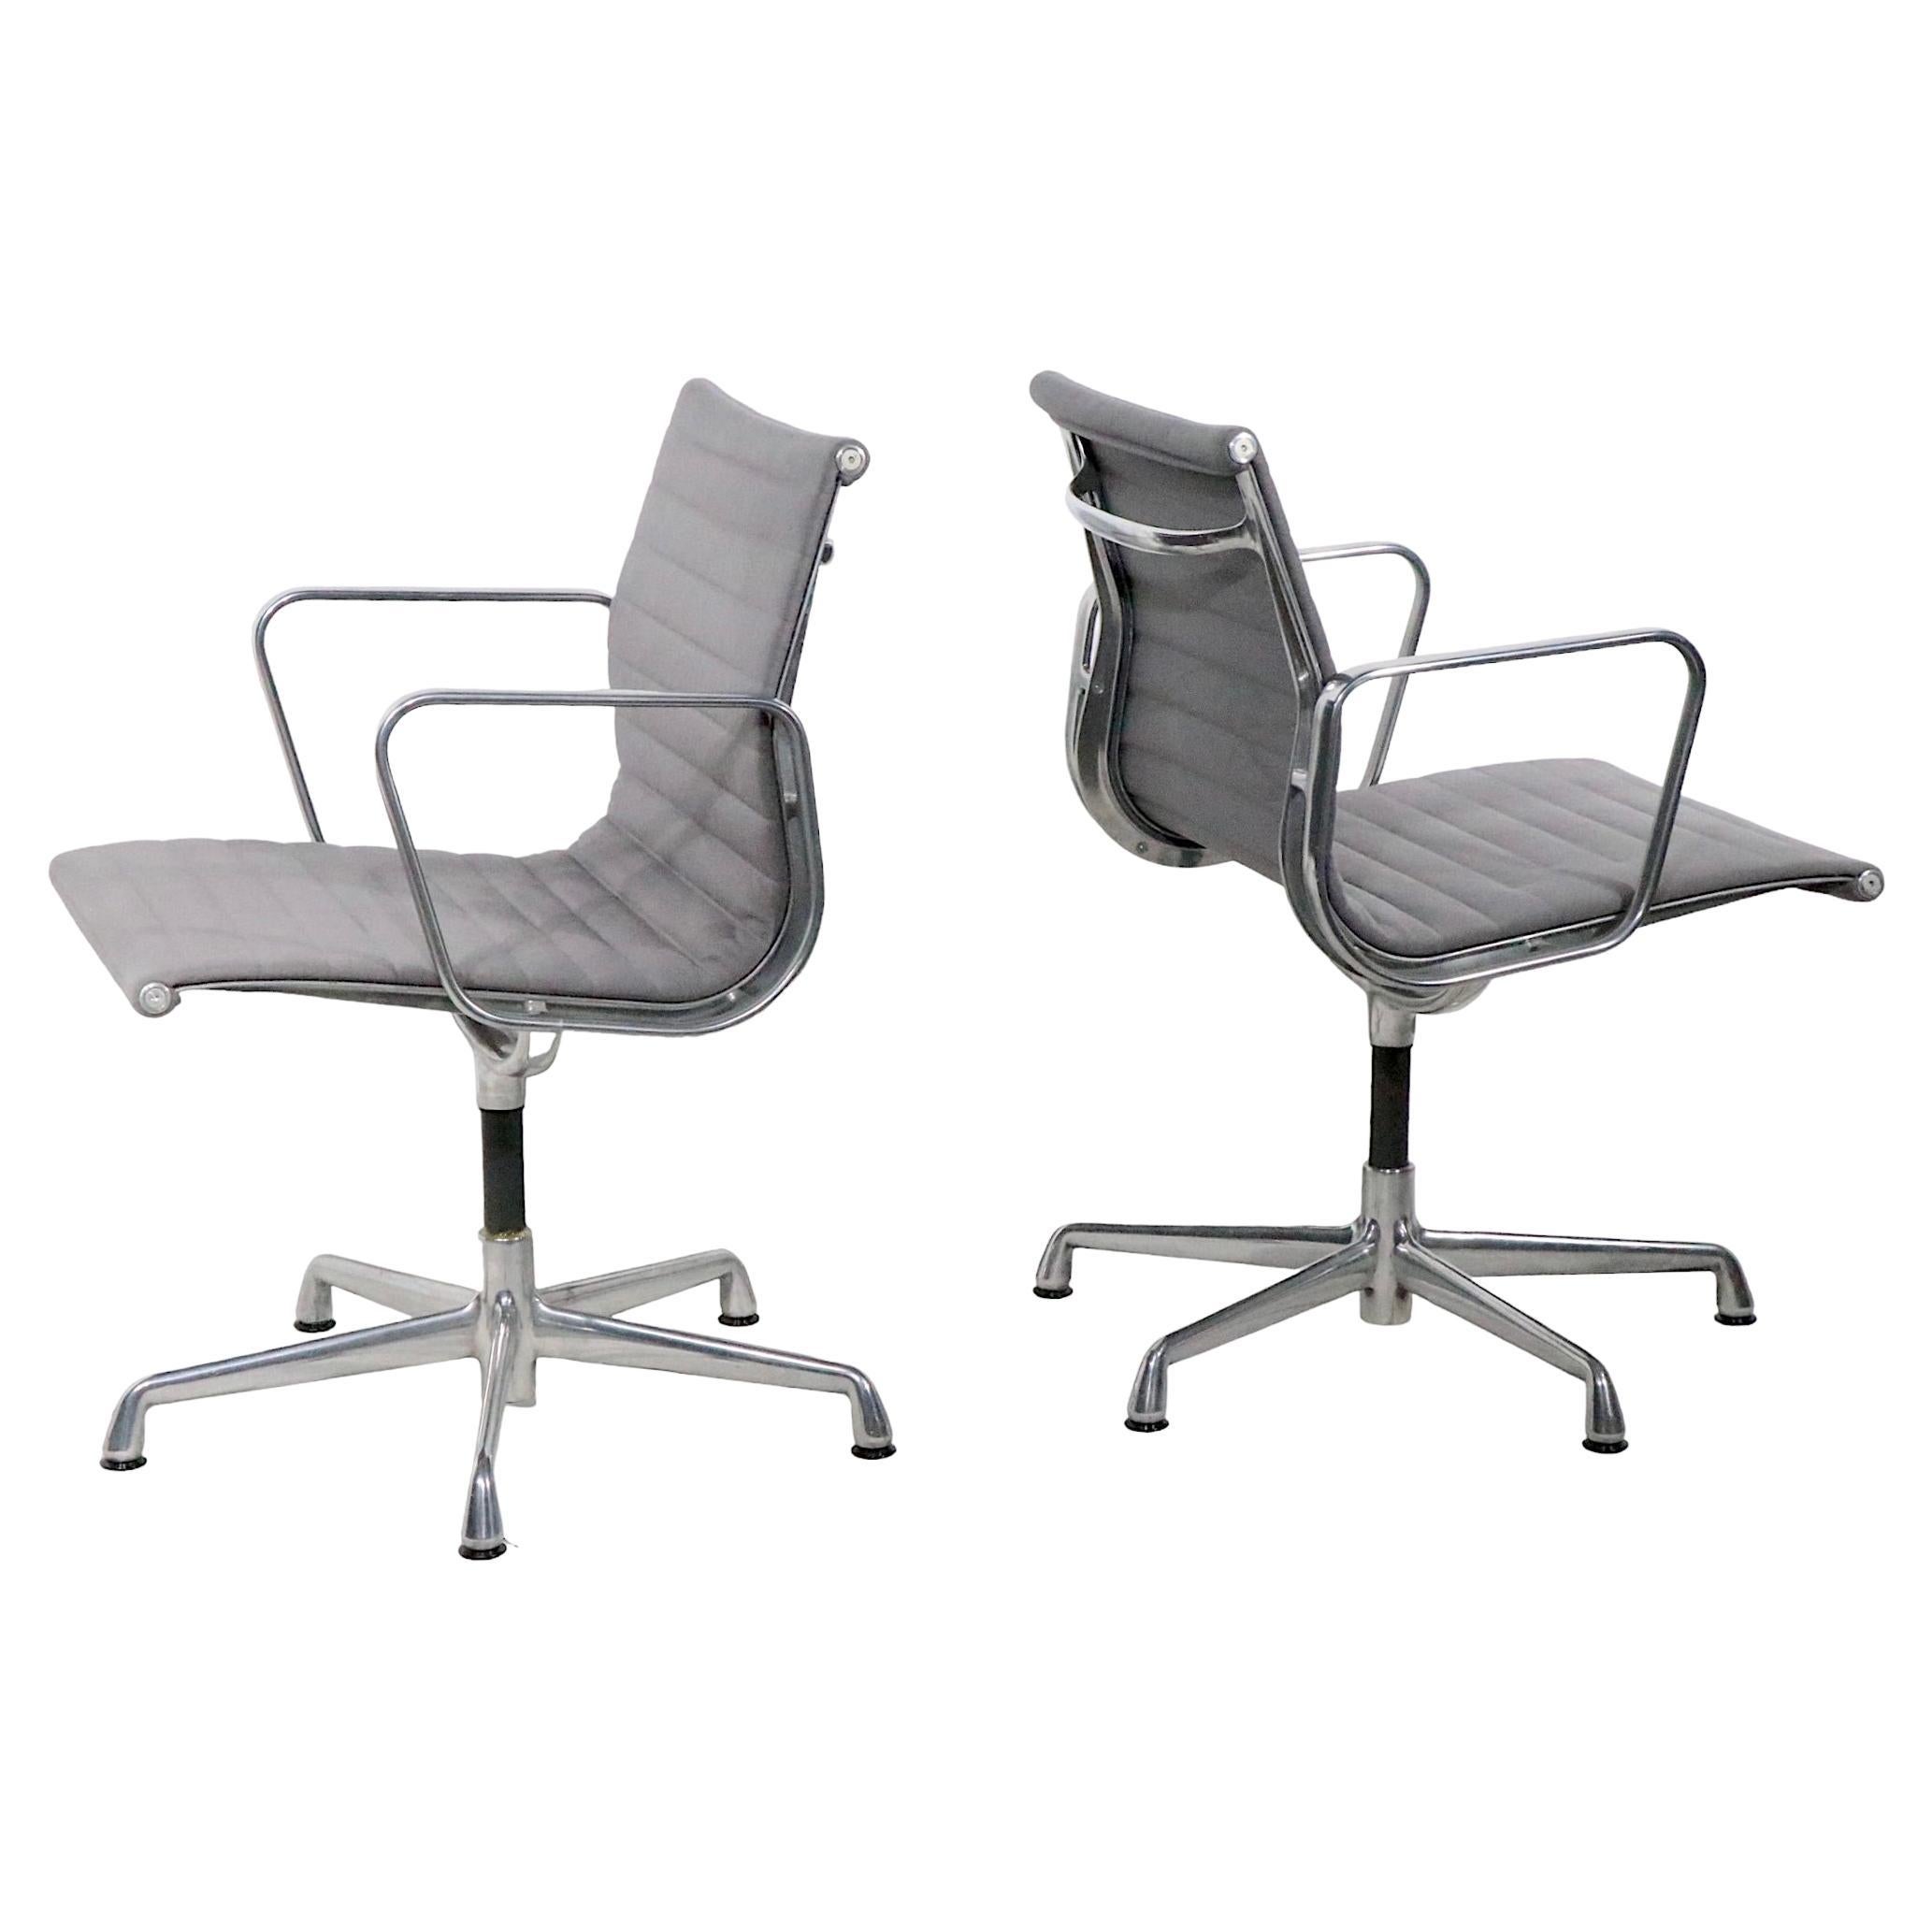 Eames Management Chairs in Grey Fabric Upholstery c. 1980 - 1990s 4 Available  For Sale